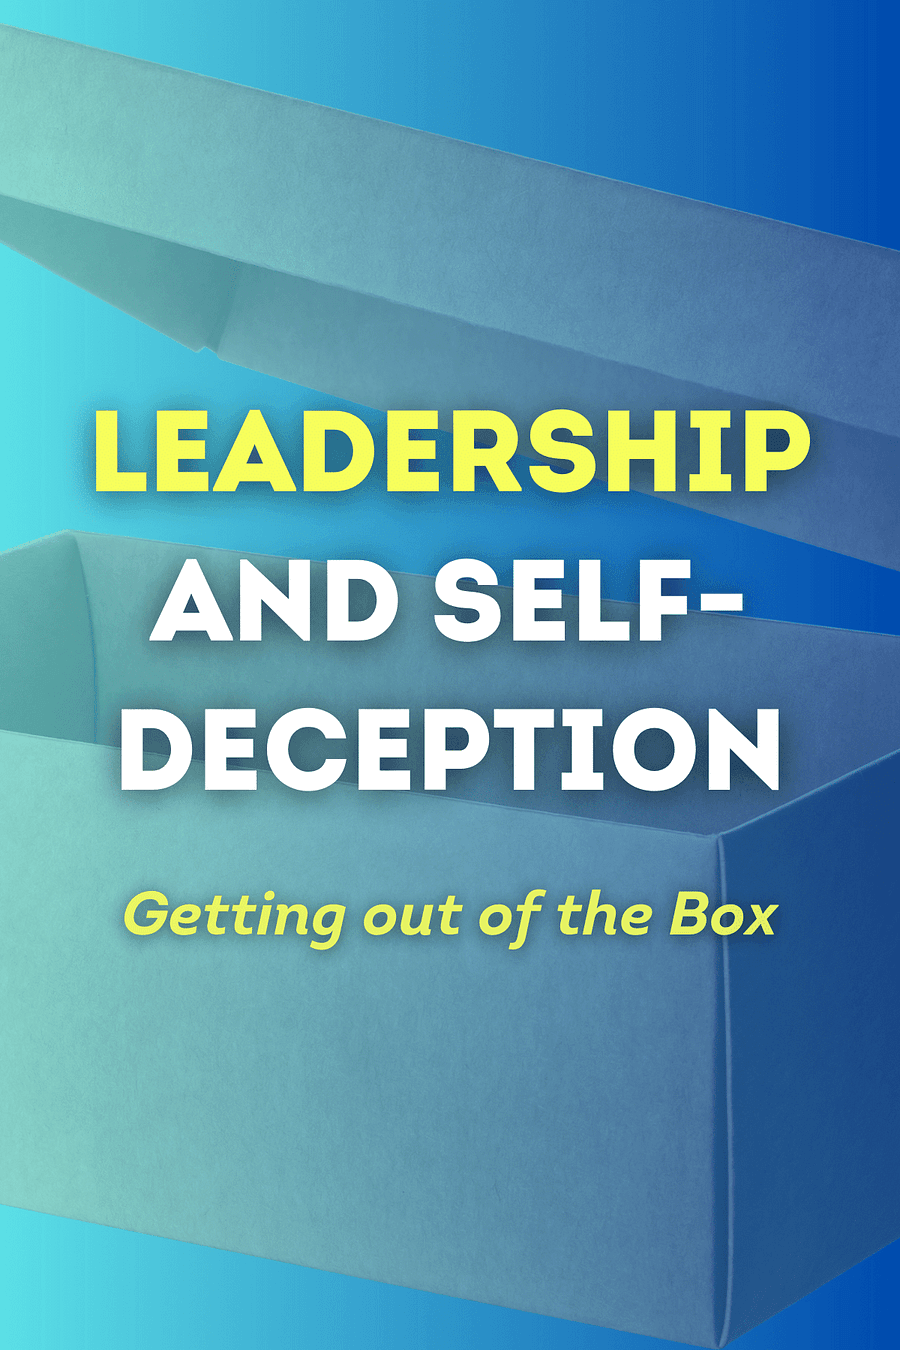 Leadership and Self-Deception by The Arbinger Institute - Book Summary